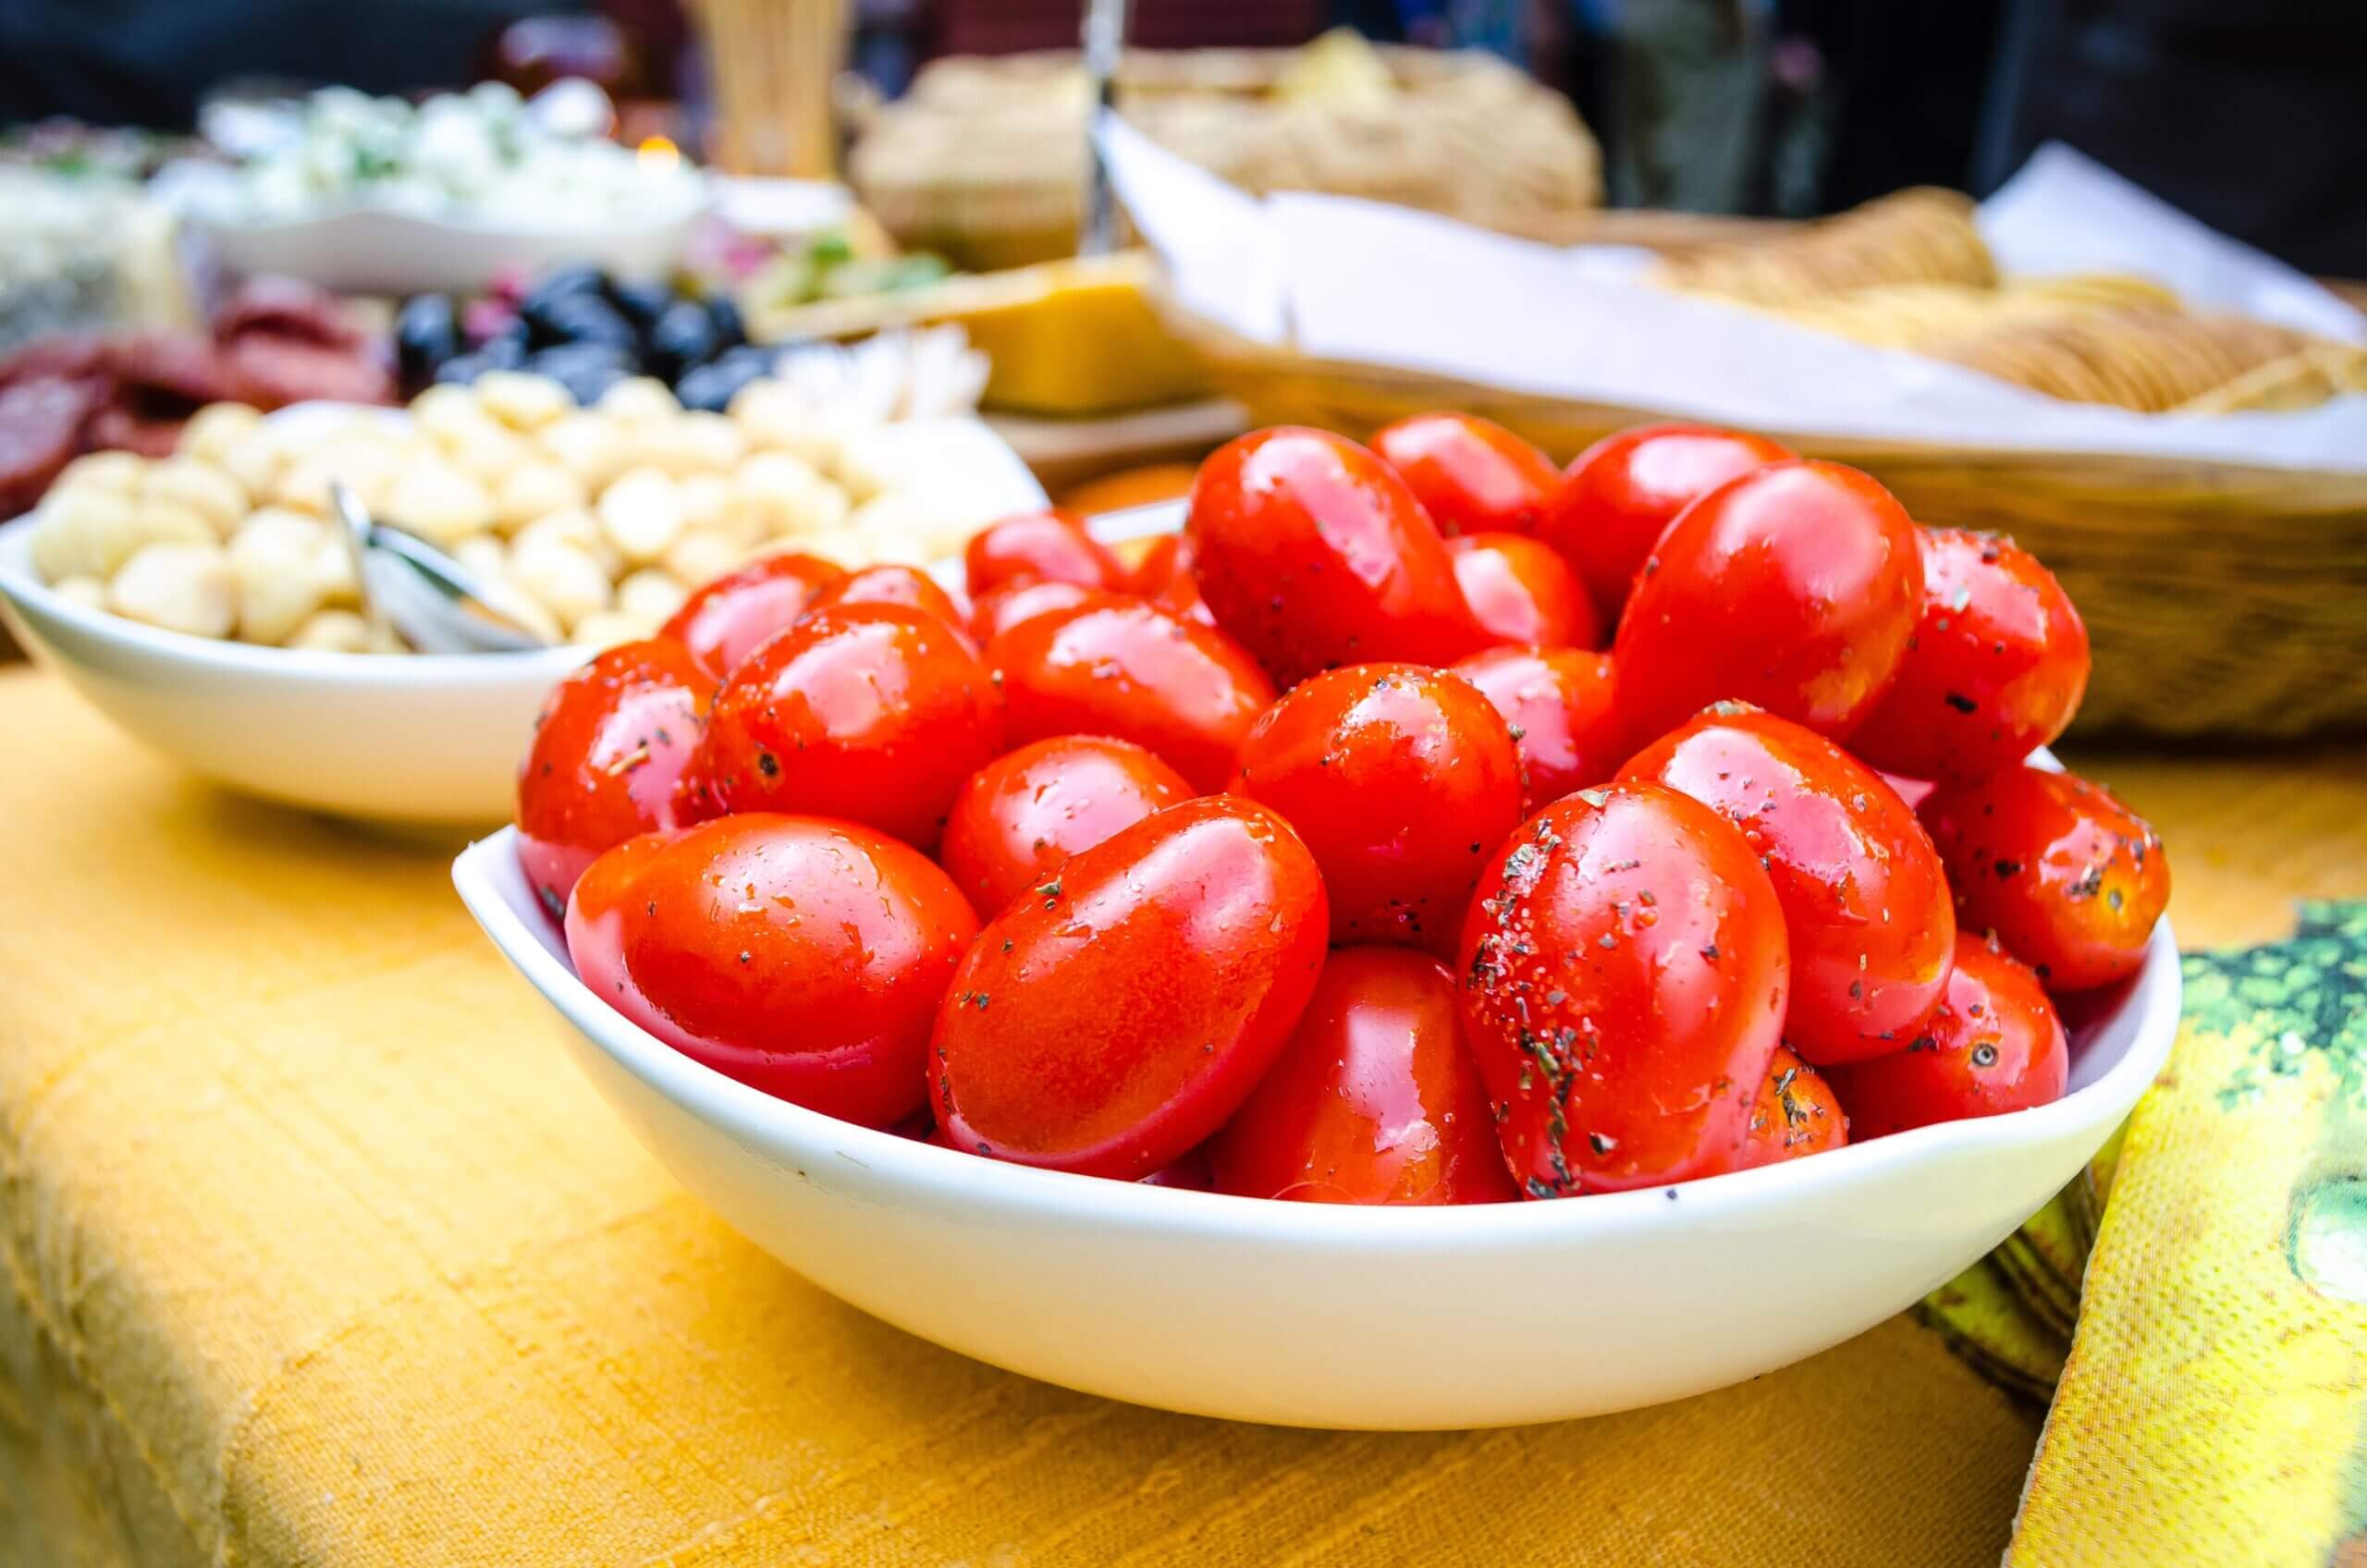 A bowl of cherry tomatoes on a table beside other bowls of food.